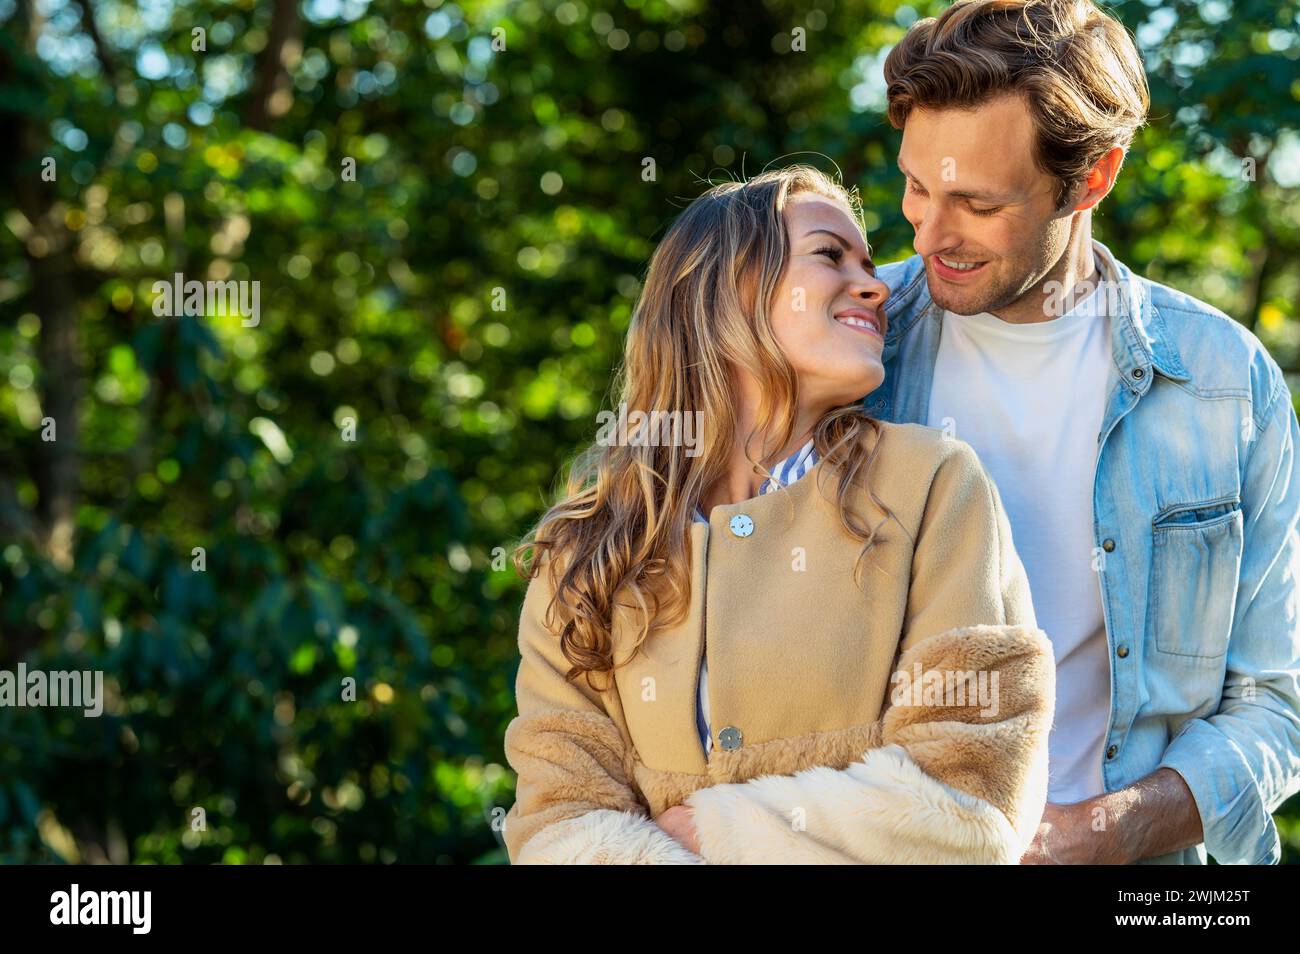 Adult couple looking at each other closely while standing outdoors Stock Photo